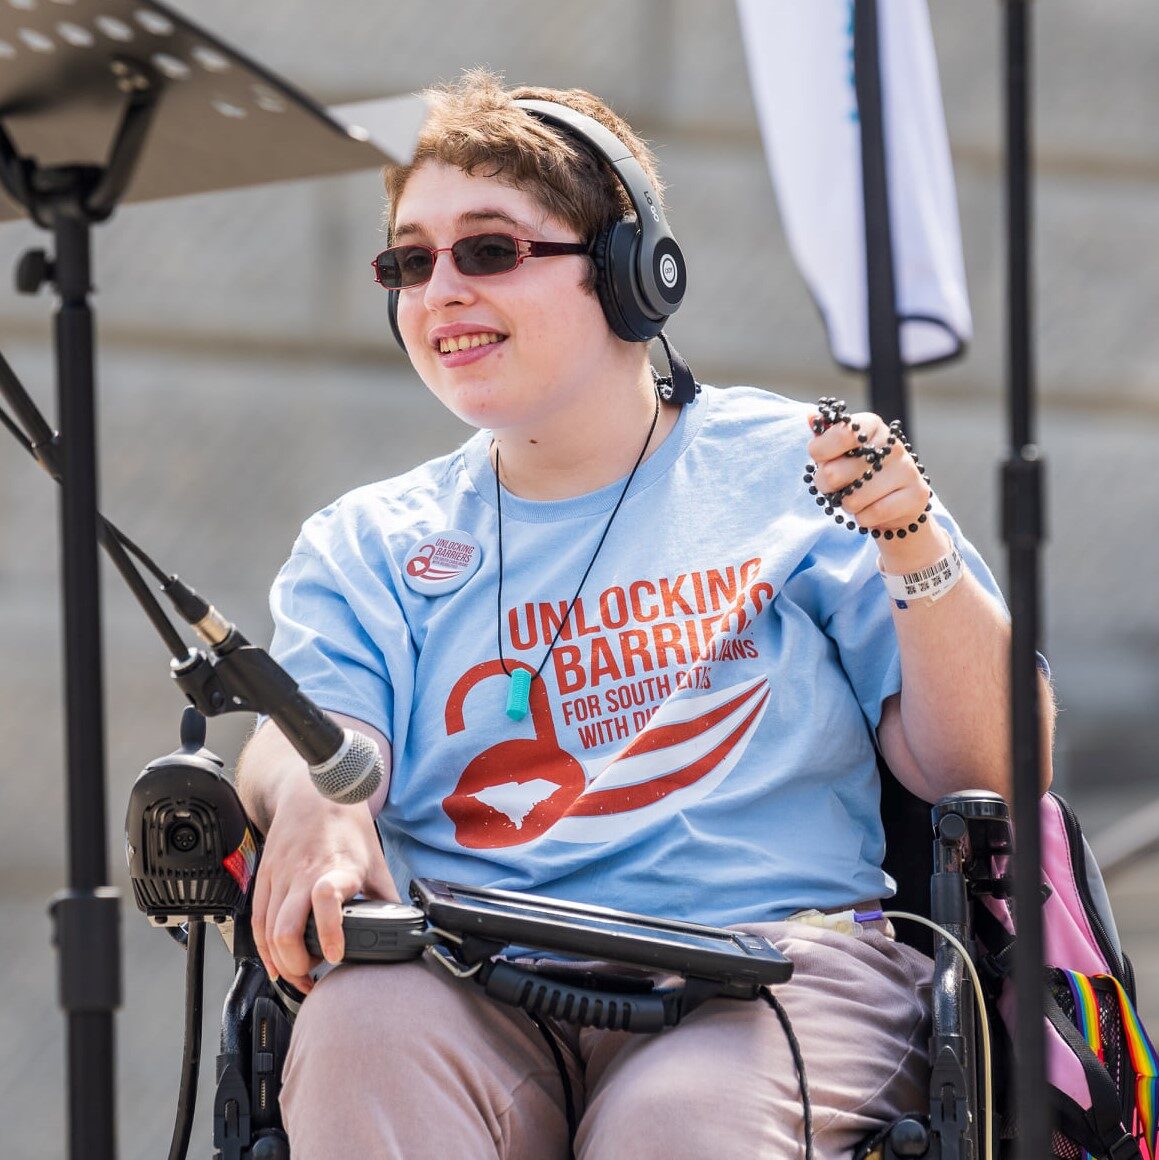 Grace is a young white person with cropped brown hair and sunglasses wearing headphones and using assistive speech techonology in their power wheelchair while giving a speech on the SC statehouse steps.